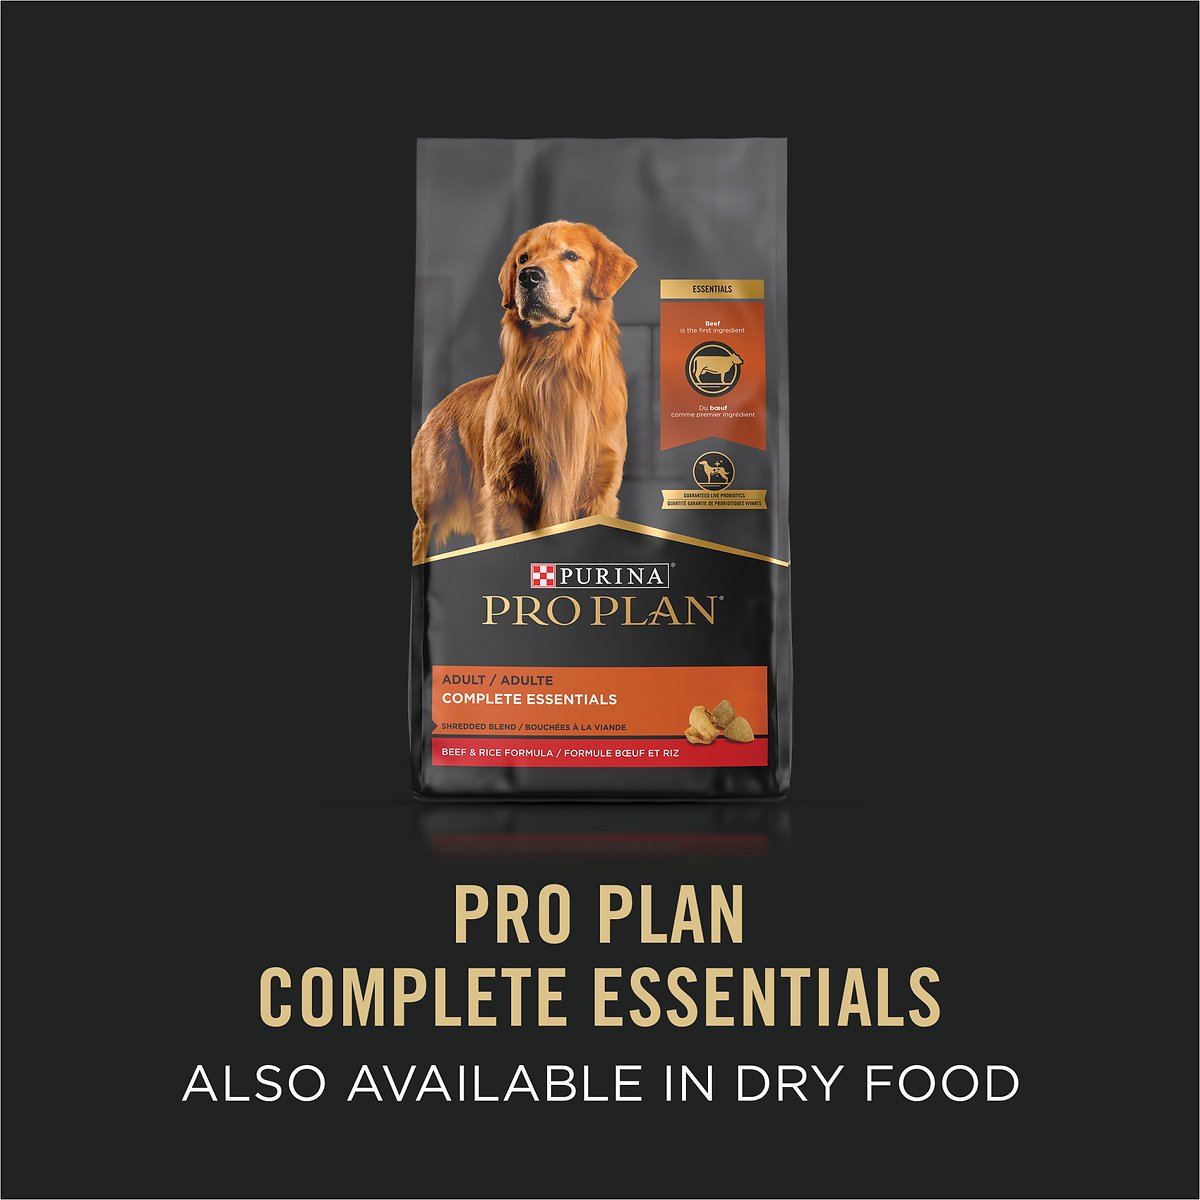 Purina Pro Plan Savor Classic Turkey, Duck & Quail Entree Grain-Free Canned Dog Food  Canned Dog Food  | PetMax Canada